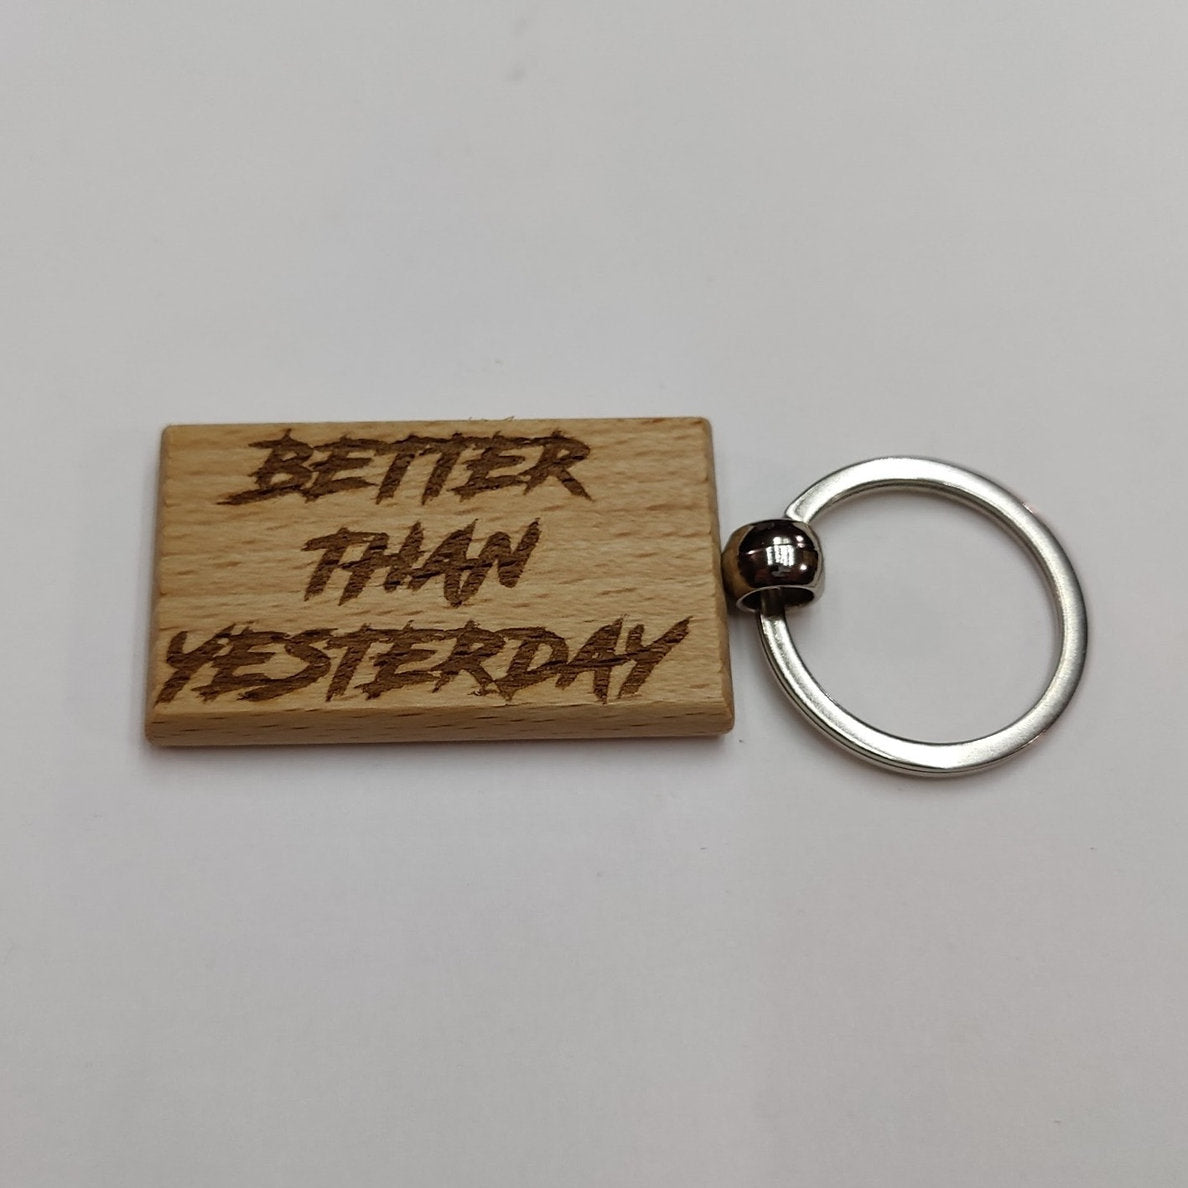 "Better Than Yesterday" Wood Keychain - JP Graphics